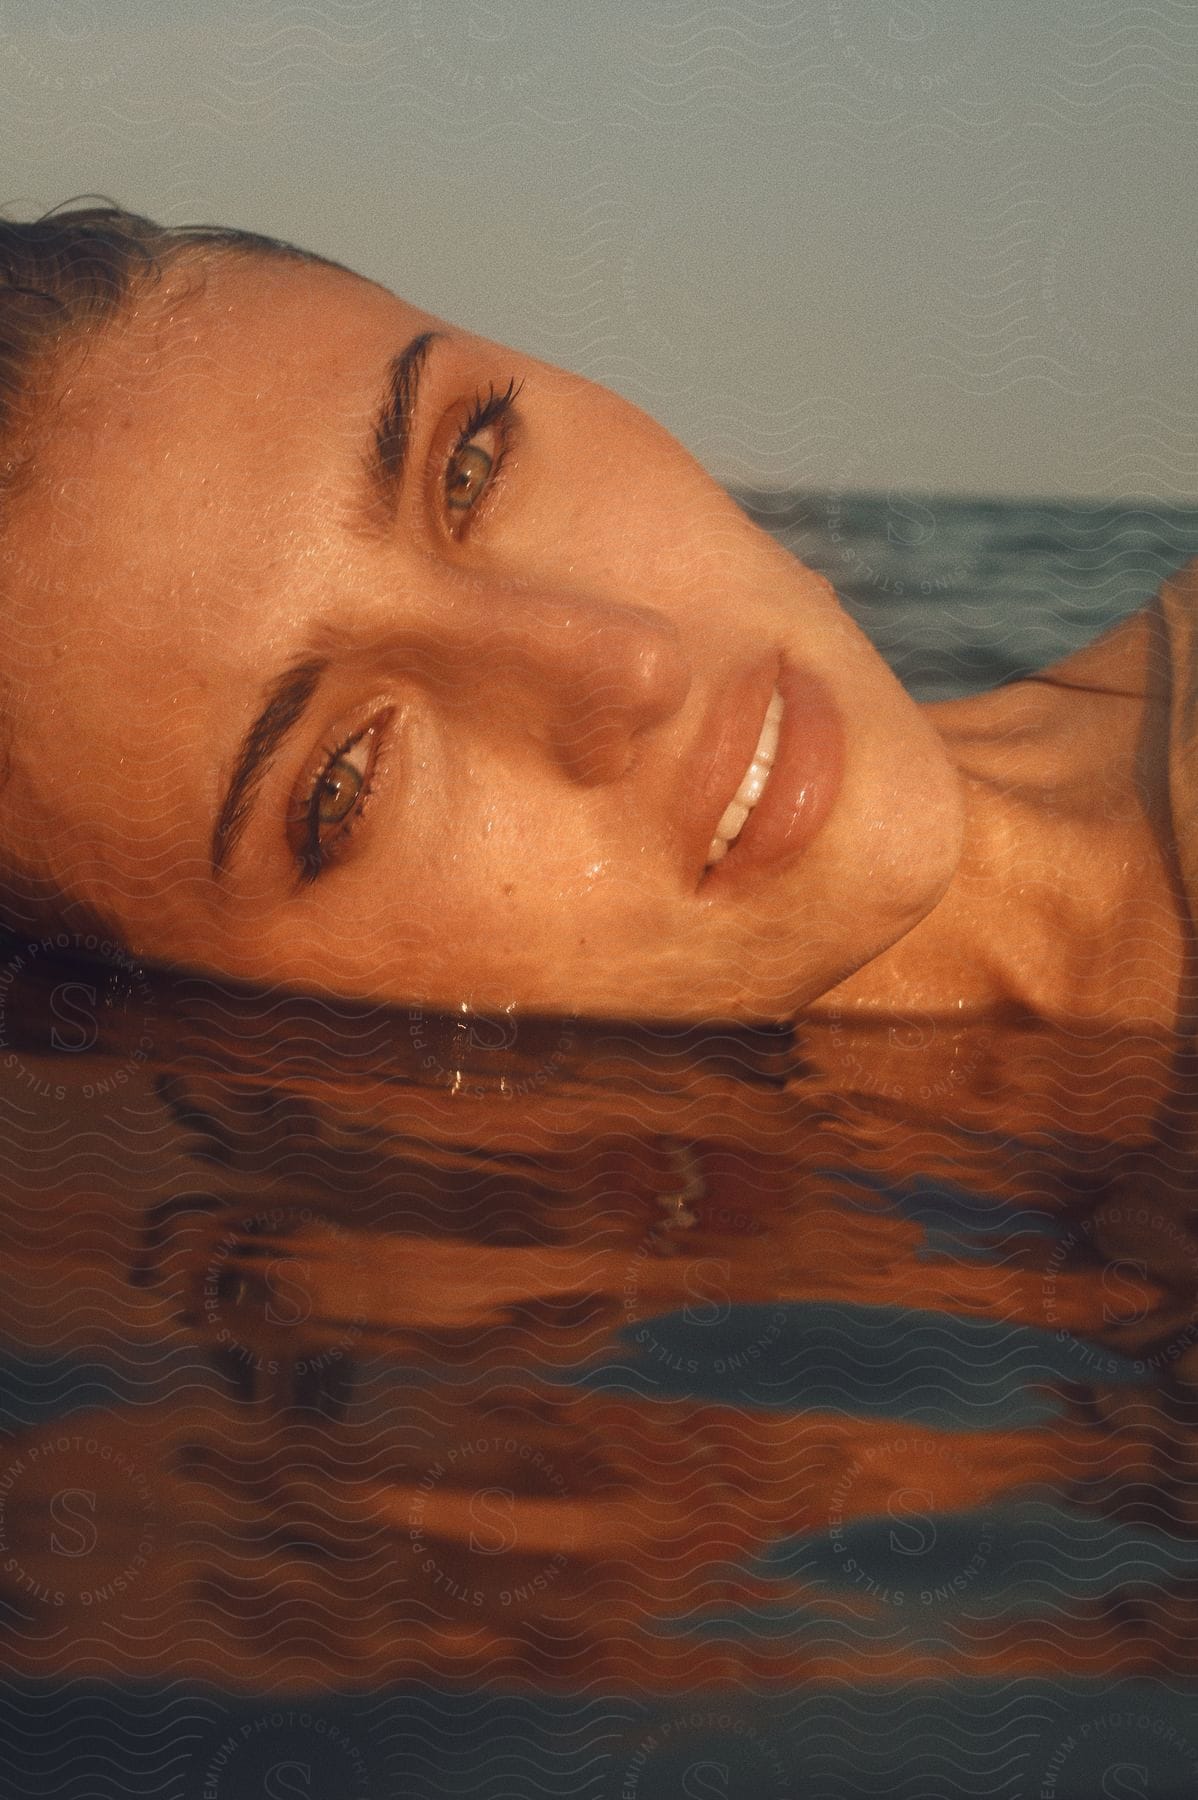 Woman modeling with her face submerged in the sea, her bright eyes visible on a cloudy day.